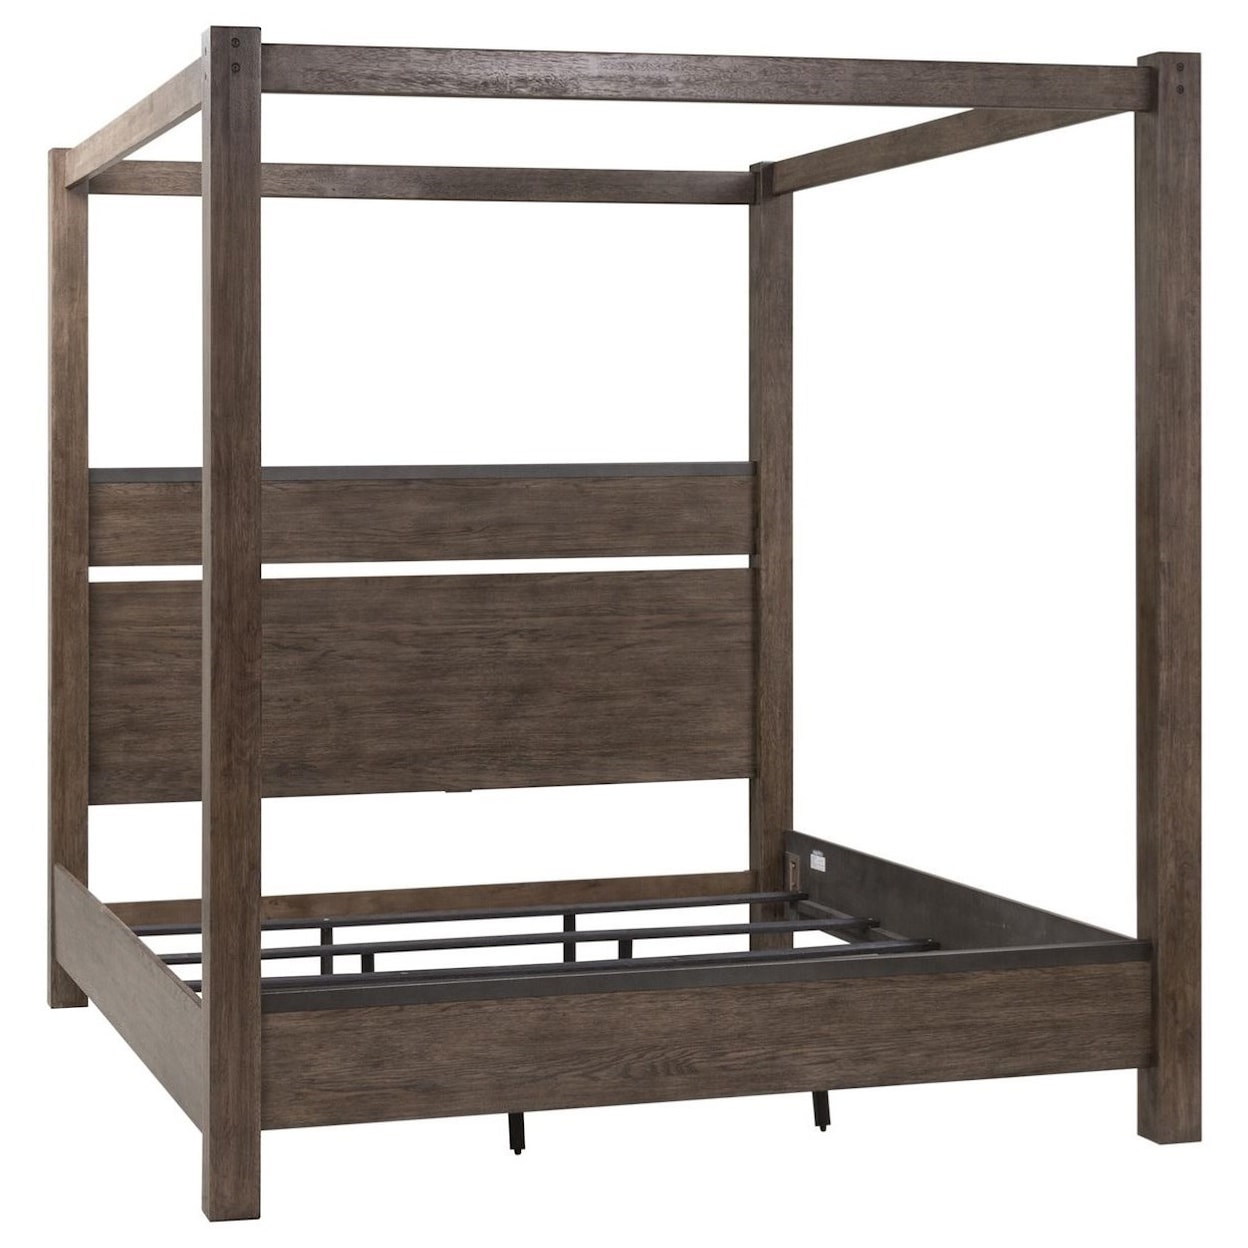 Liberty Furniture Sonoma Road Queen Canopy Bed